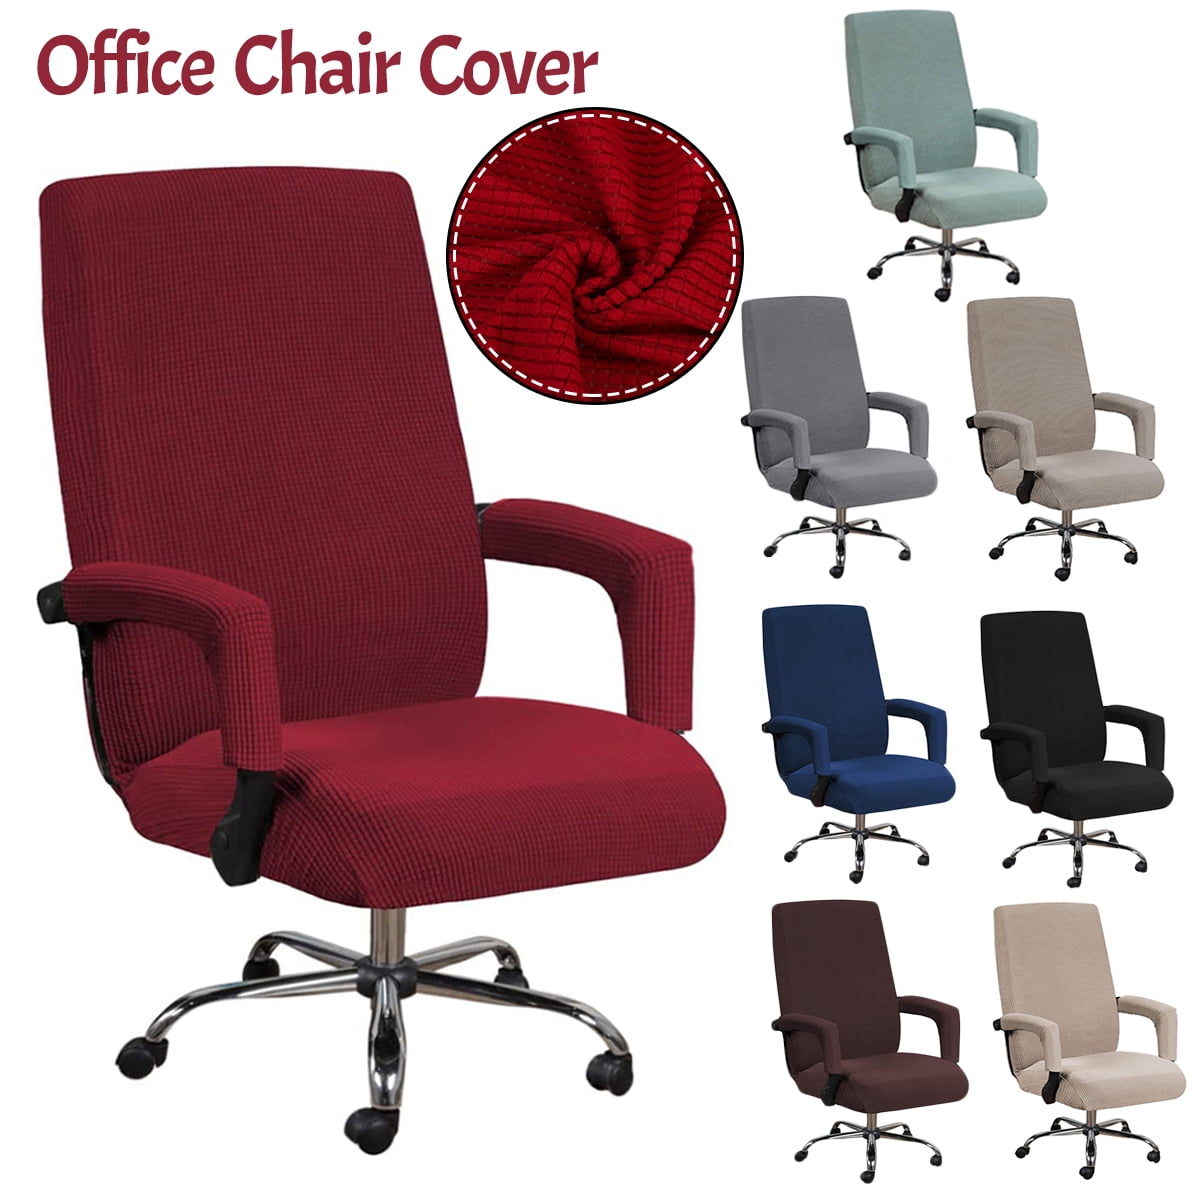 Chair Cover & armrest Cover Office Chair Arms Protector Stretchable for Desk Chair/Rotating Chair/Computer Chair Armrest Slipcover Pads with Chair Cover Black 